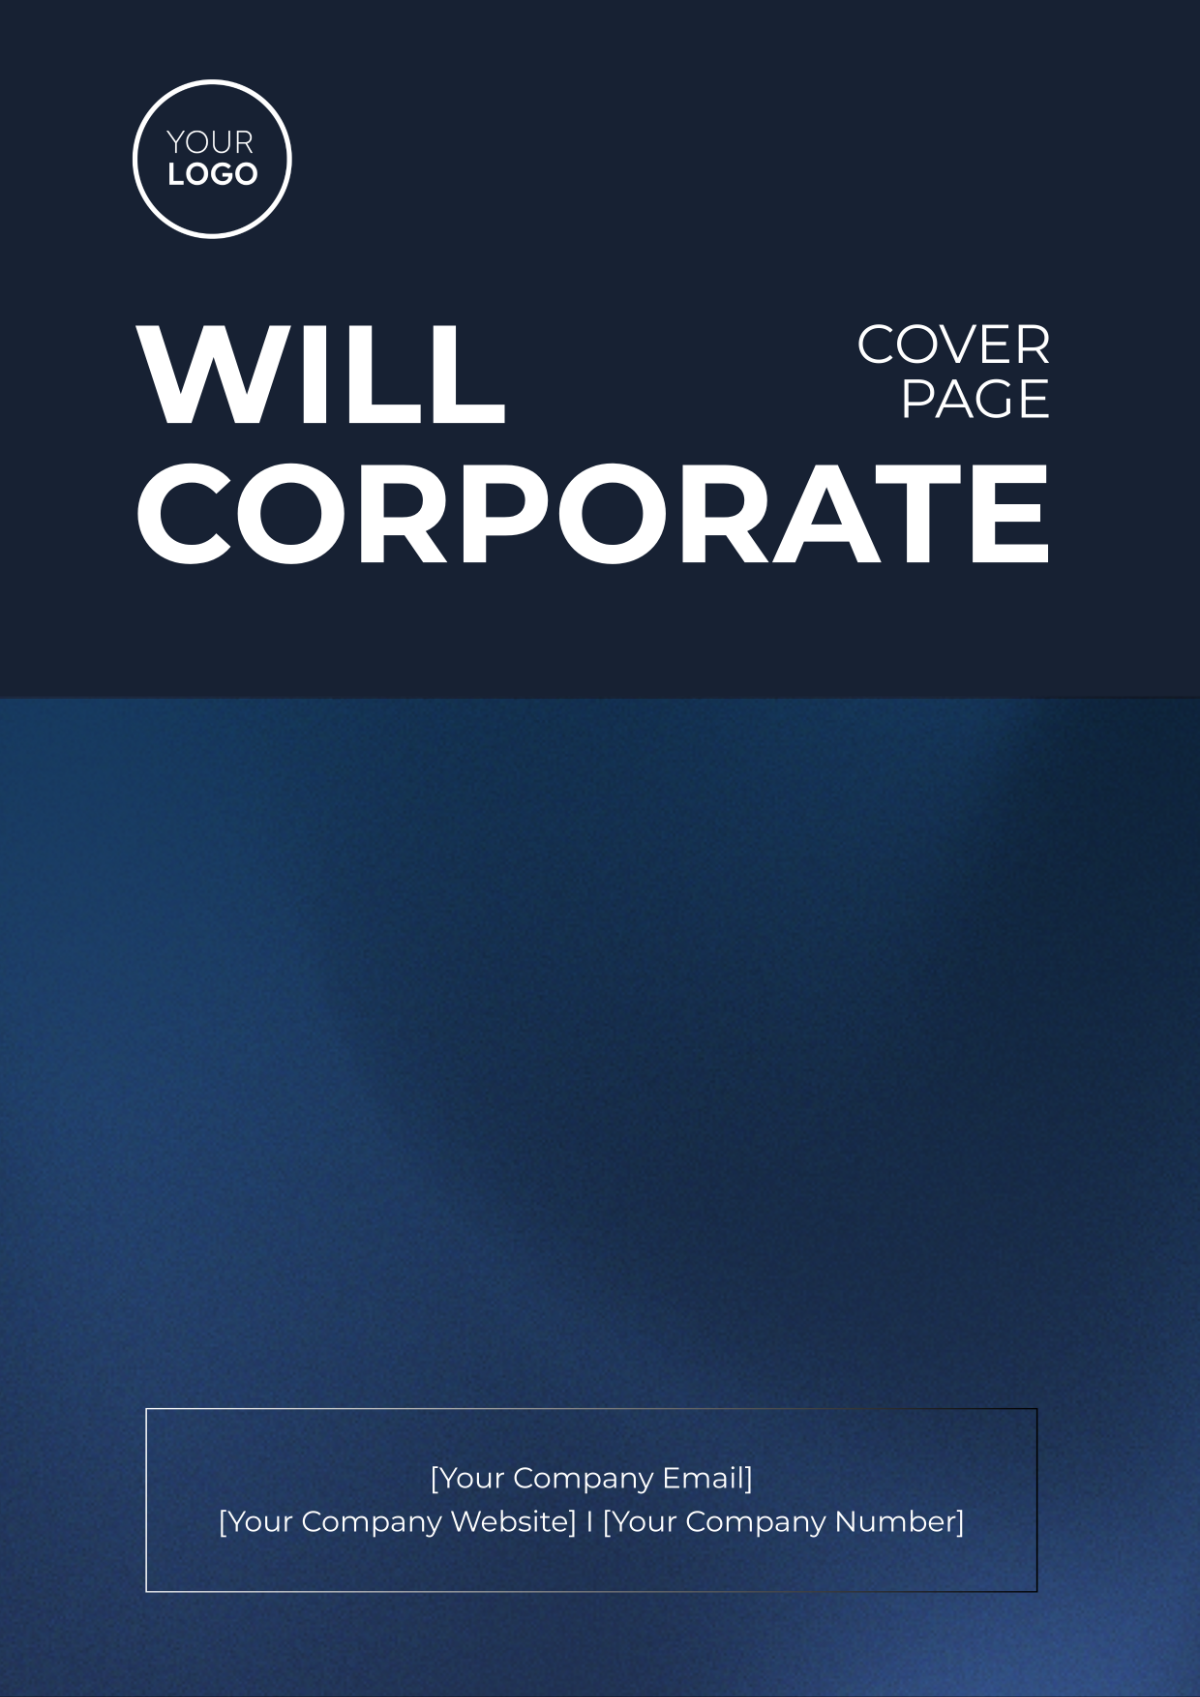 Will Corporate Cover Page